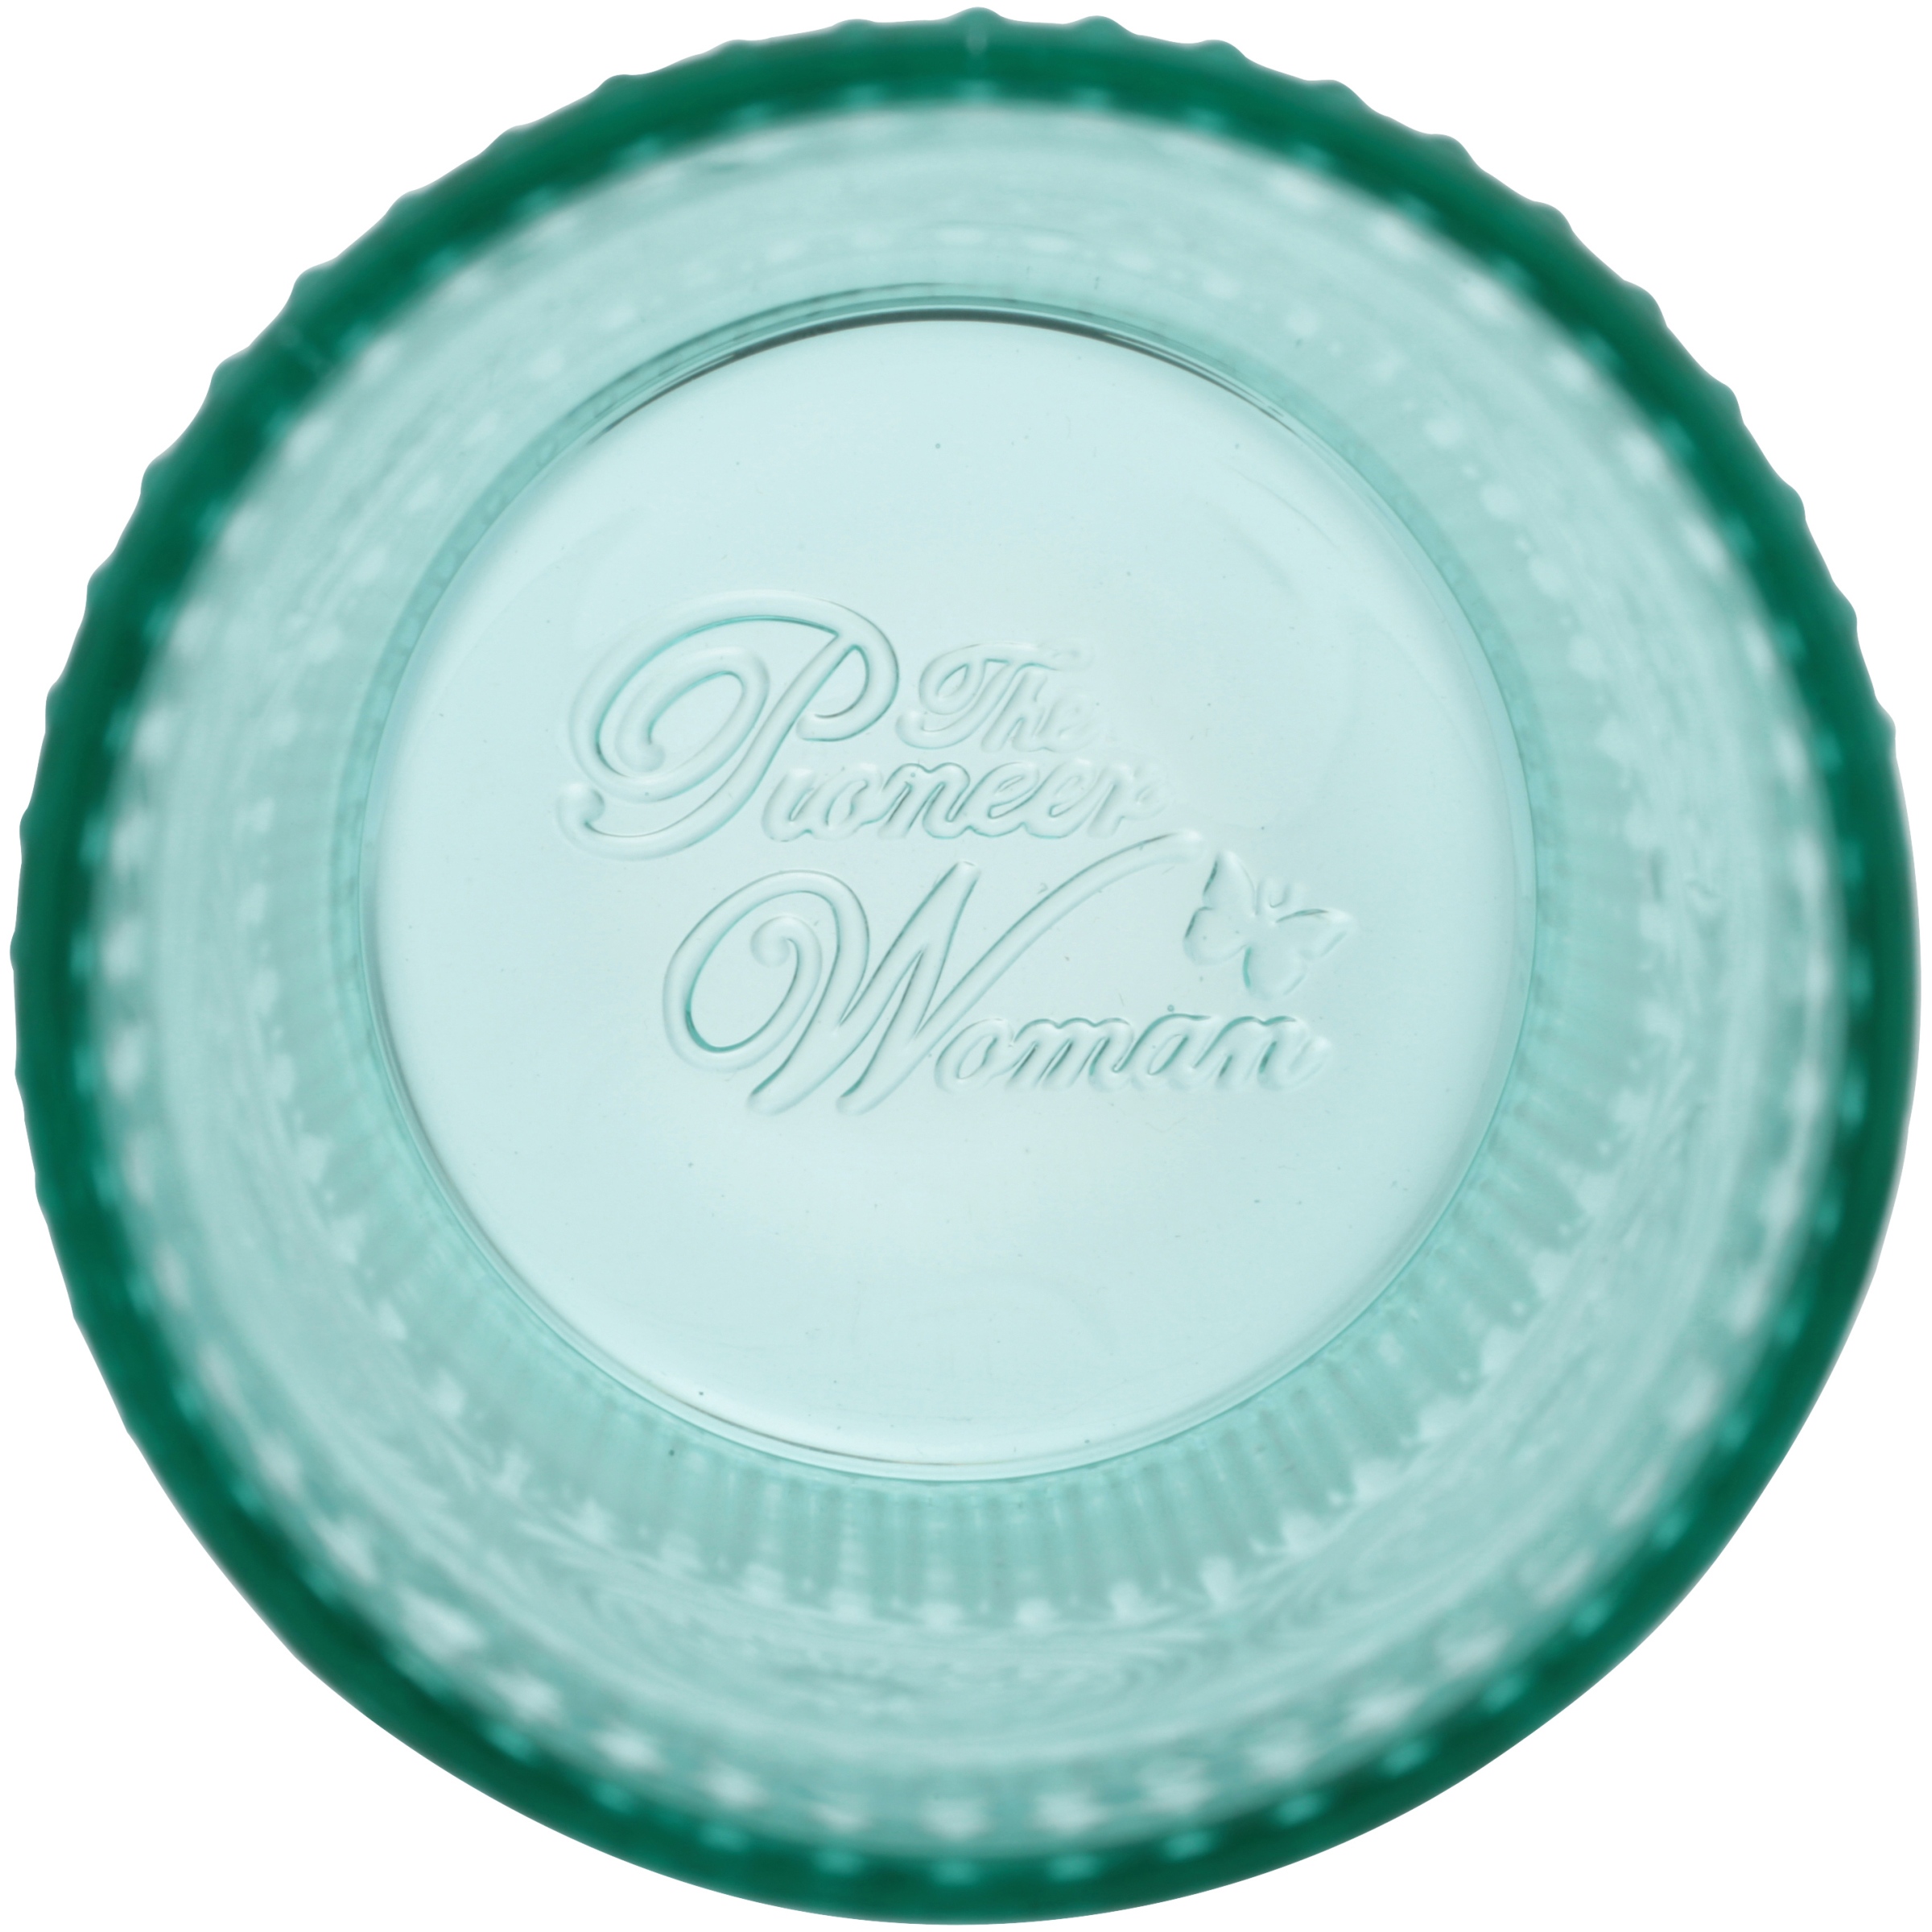 The Pioneer Woman Adeline 16-Ounce Teal Emboss Glass Tumblers, Set of 4 - image 3 of 5